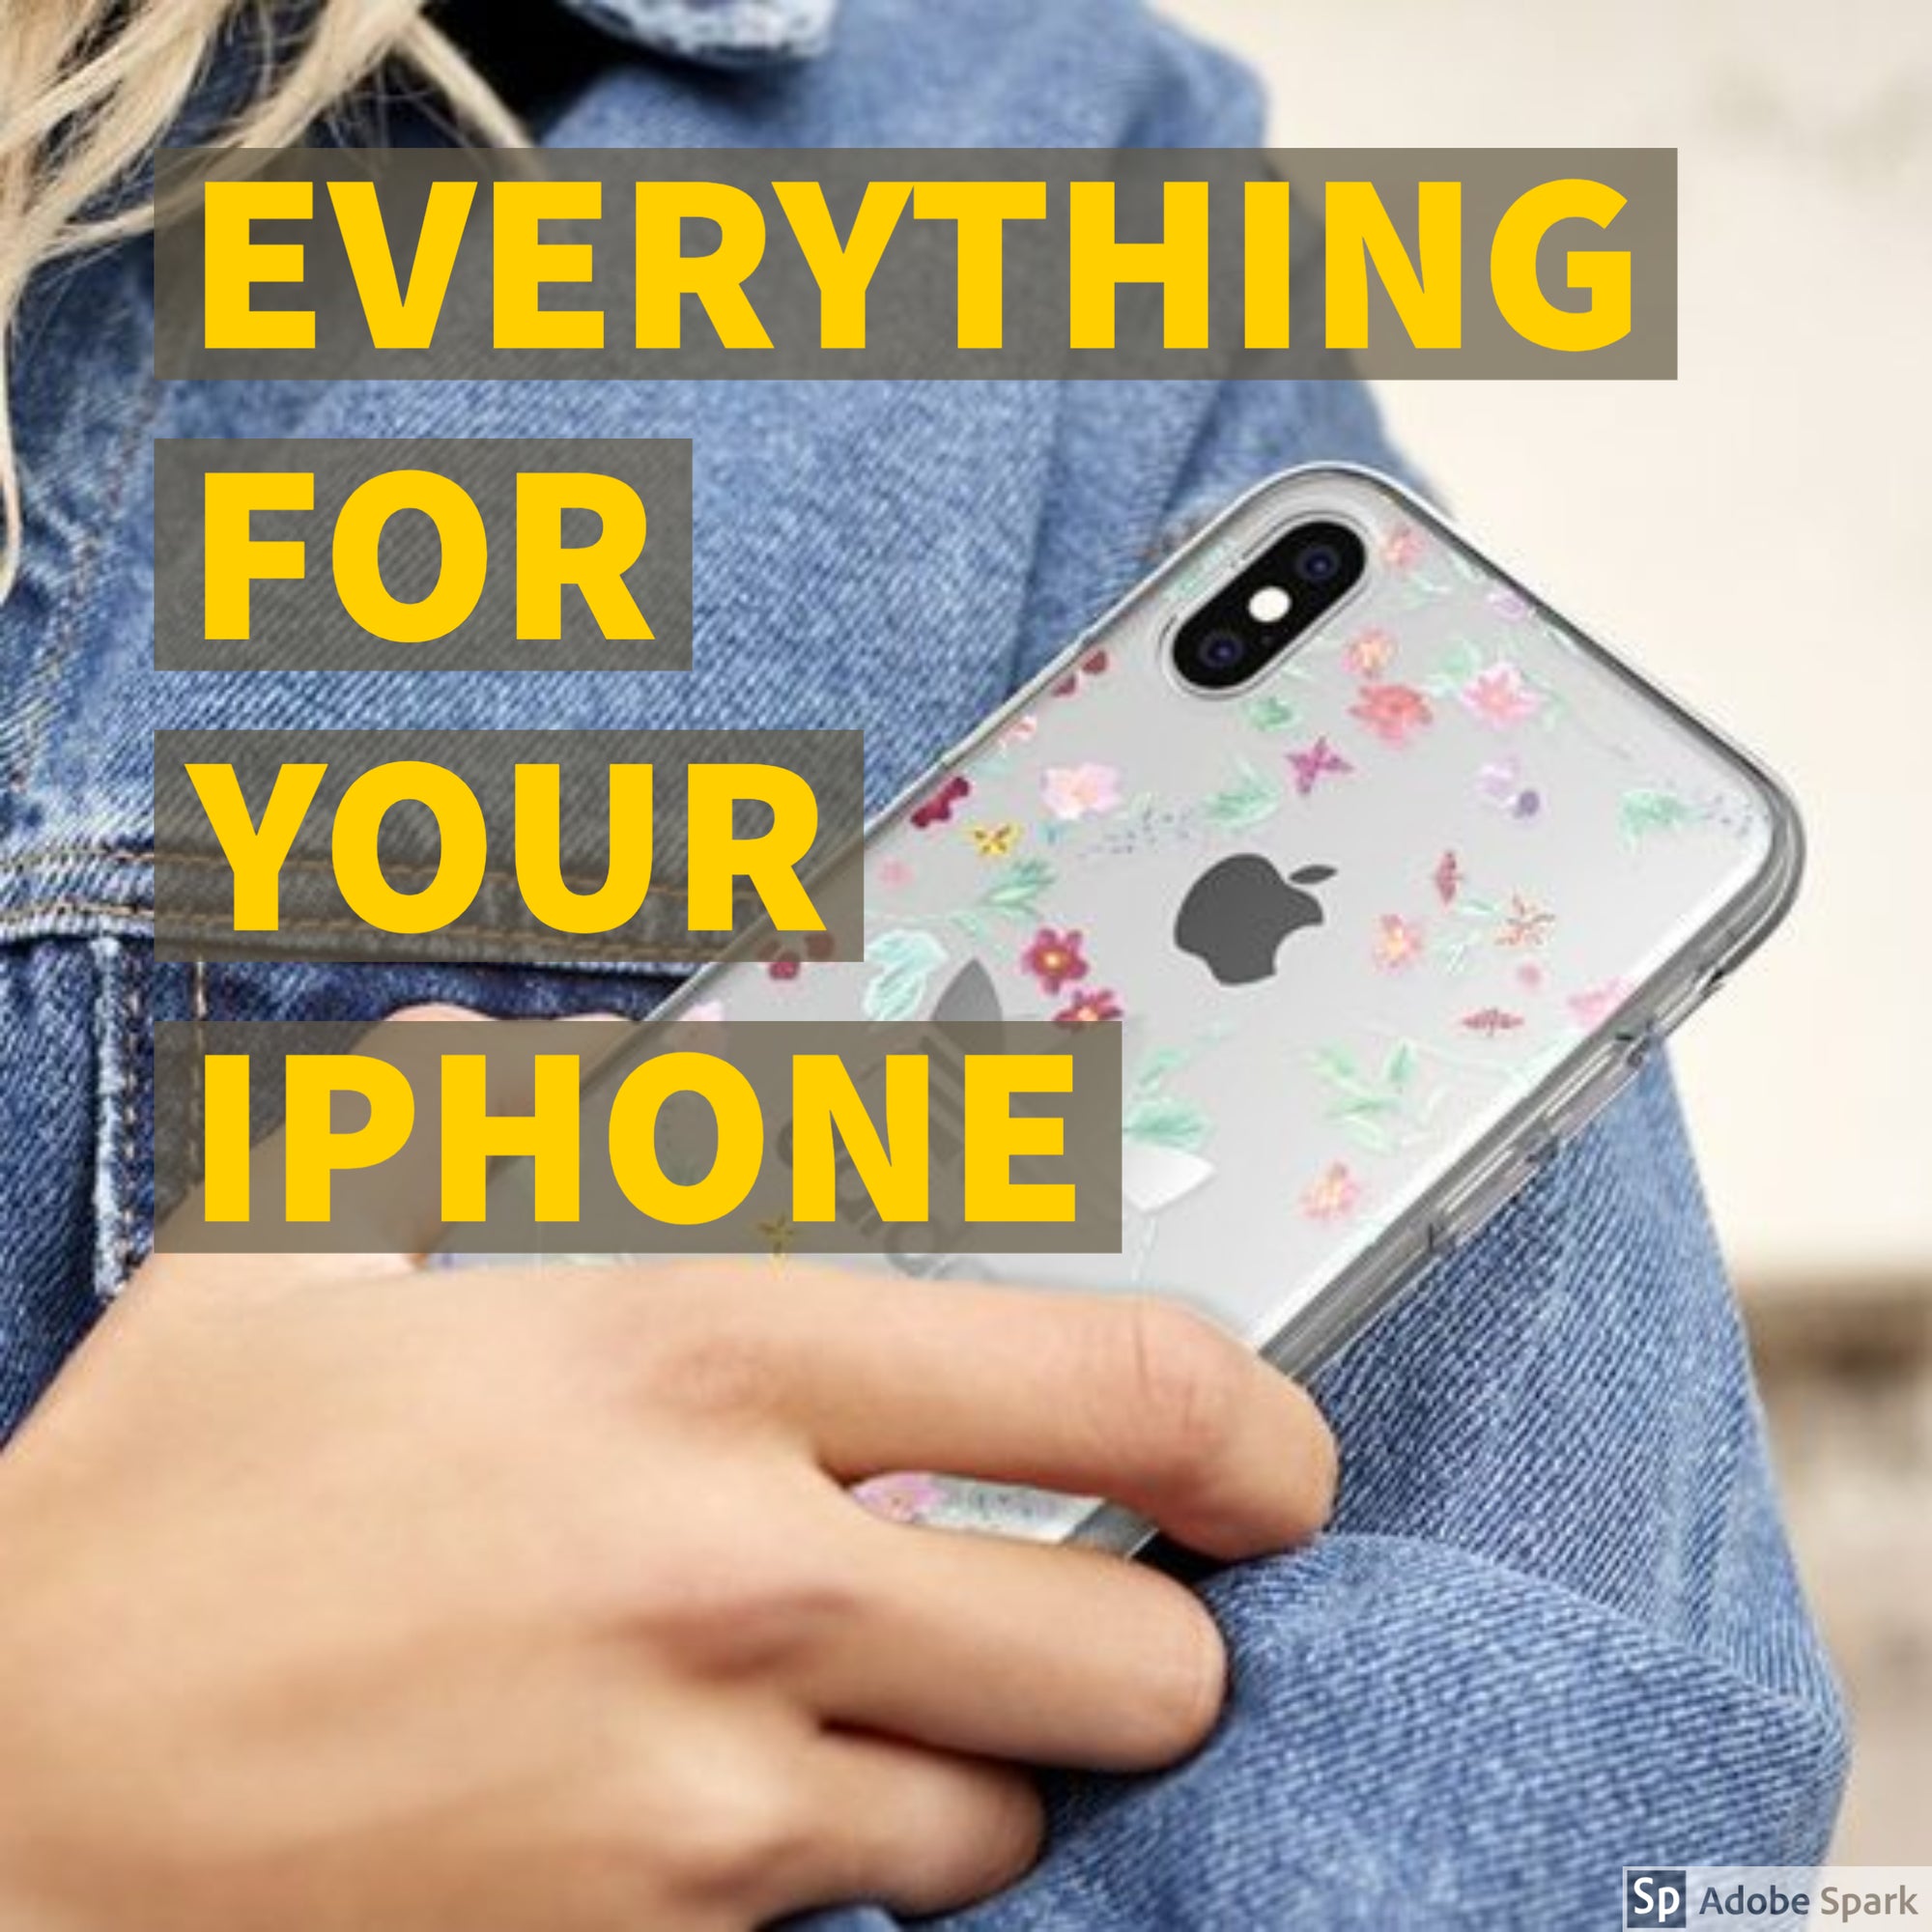 Everything for your iPhone